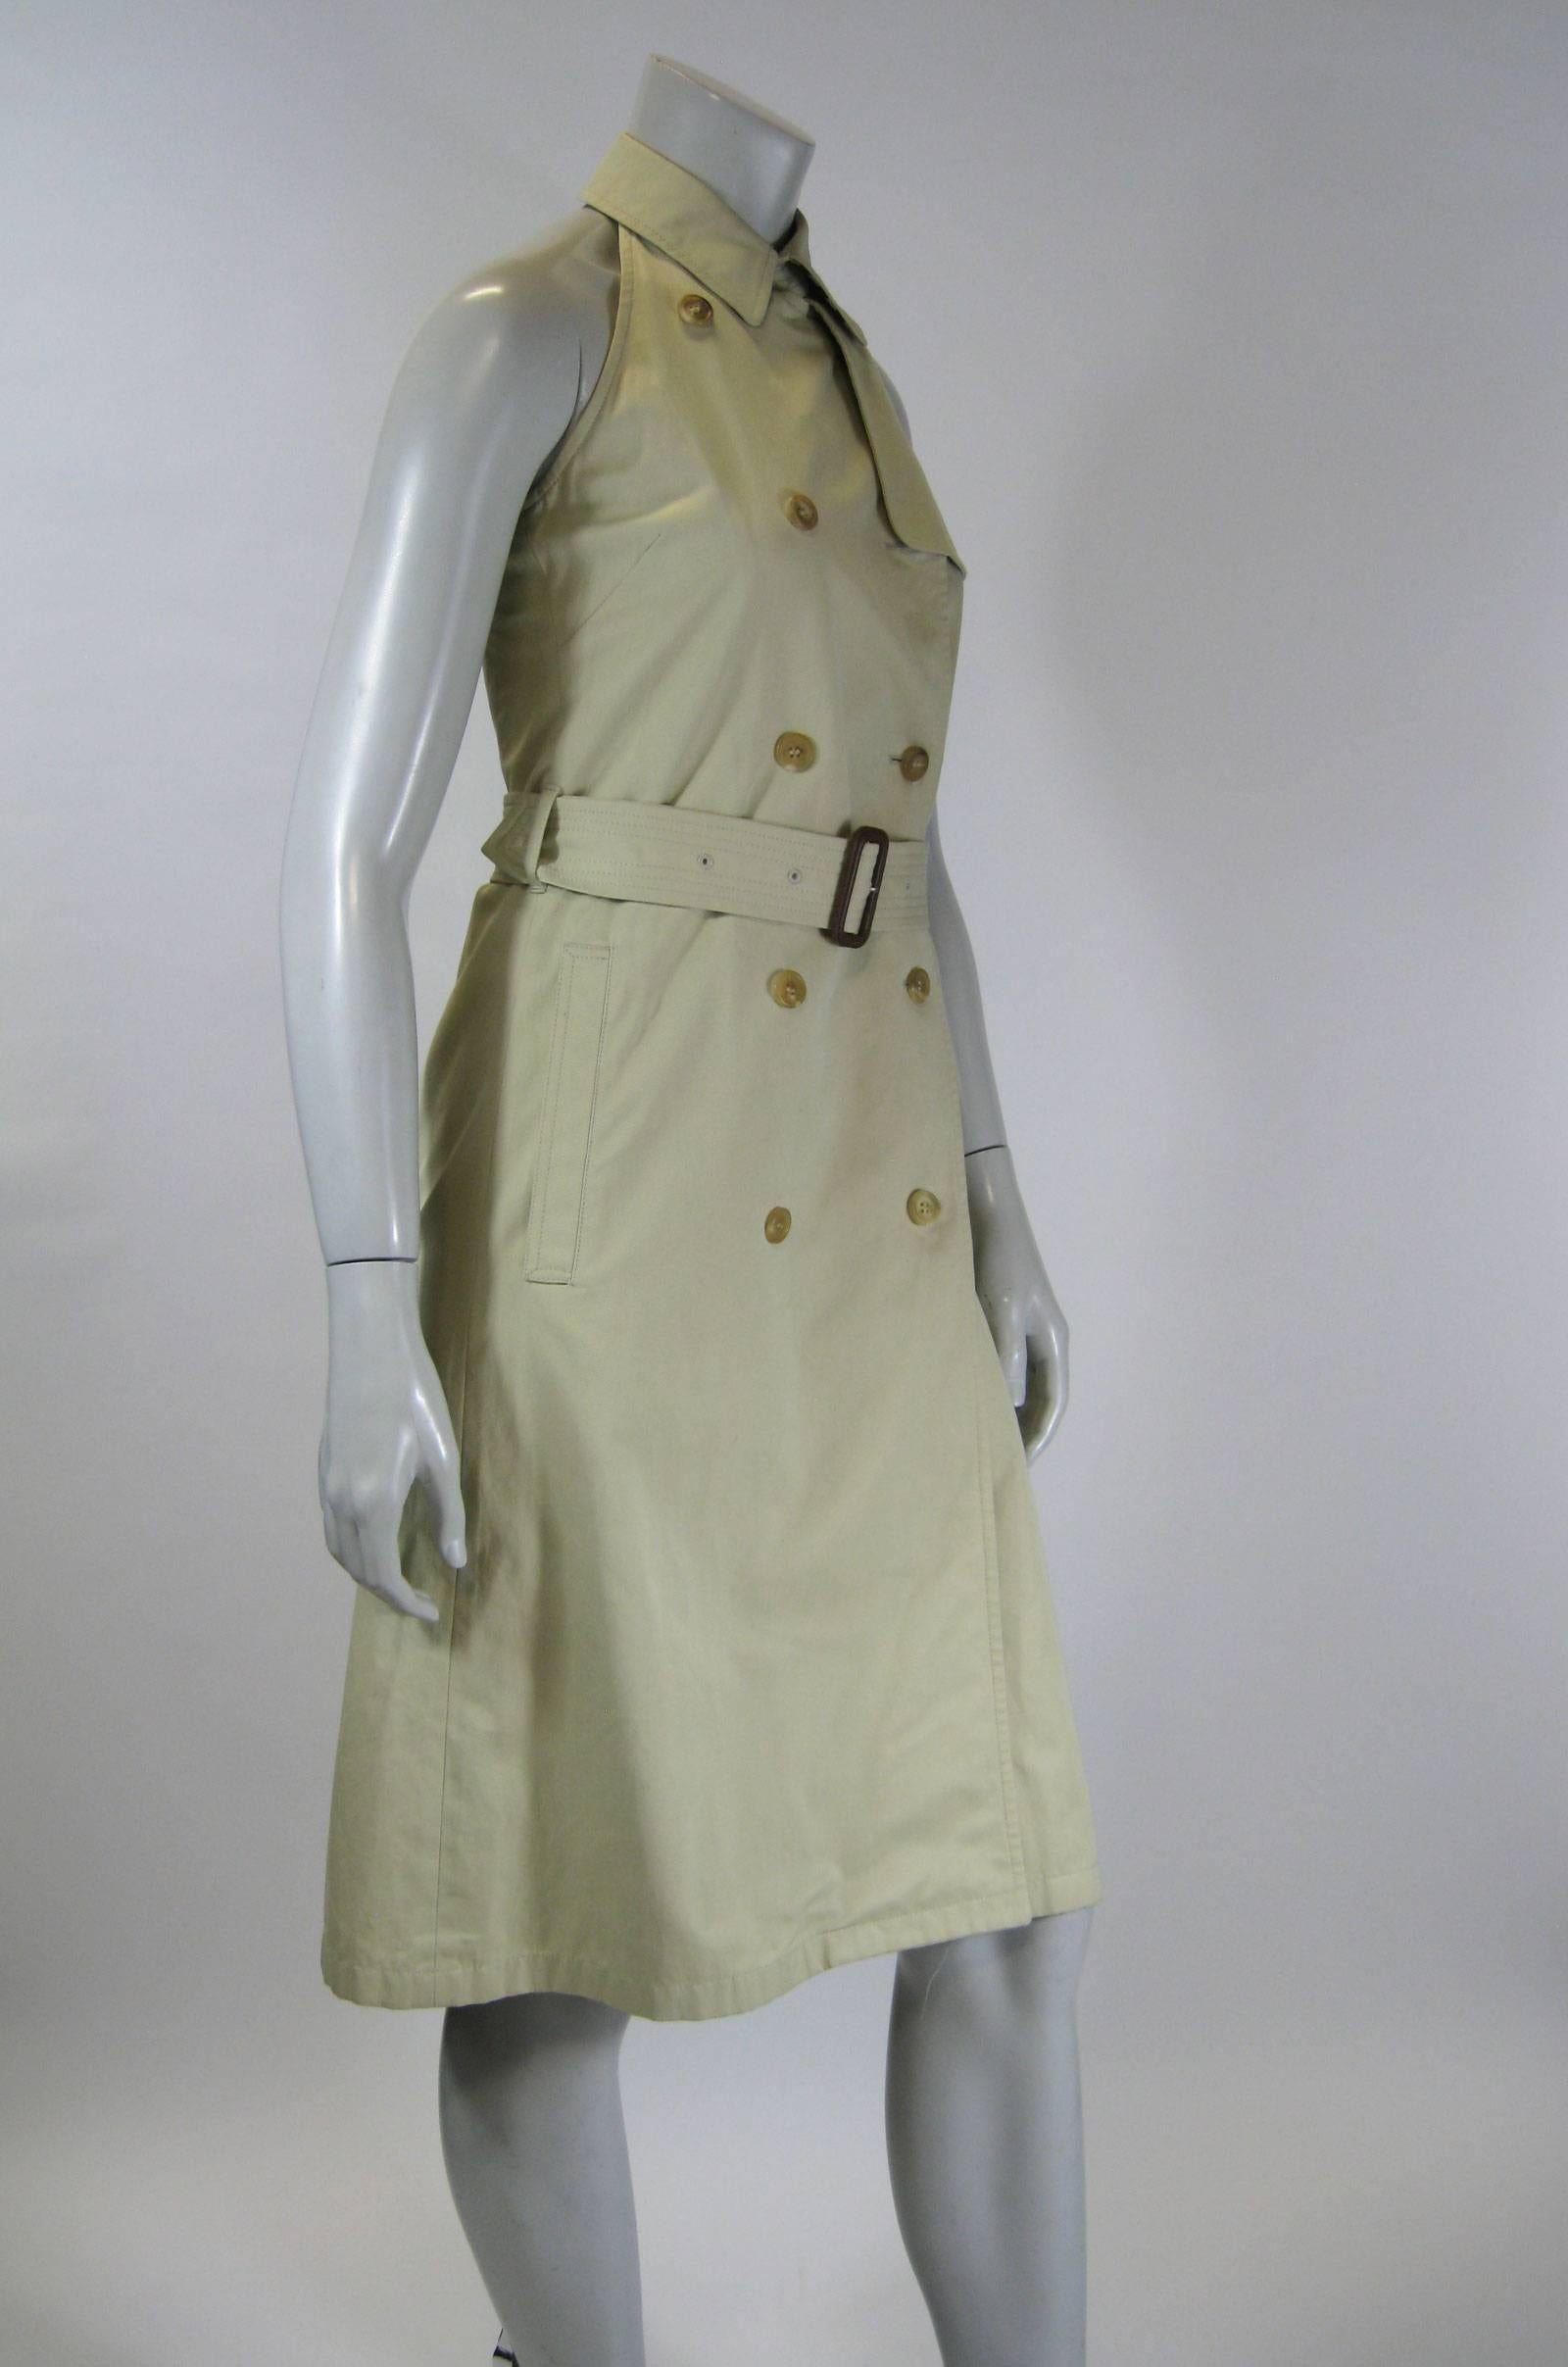 Burberry double breasted trench coat style dress
Halter style top with open back.
Fold over collar with trademark Burberry plaid lining.
Plaid lining inside dress.
Self belt.
Back kick pleat.
Tagged a size US 4.

Bust: 32